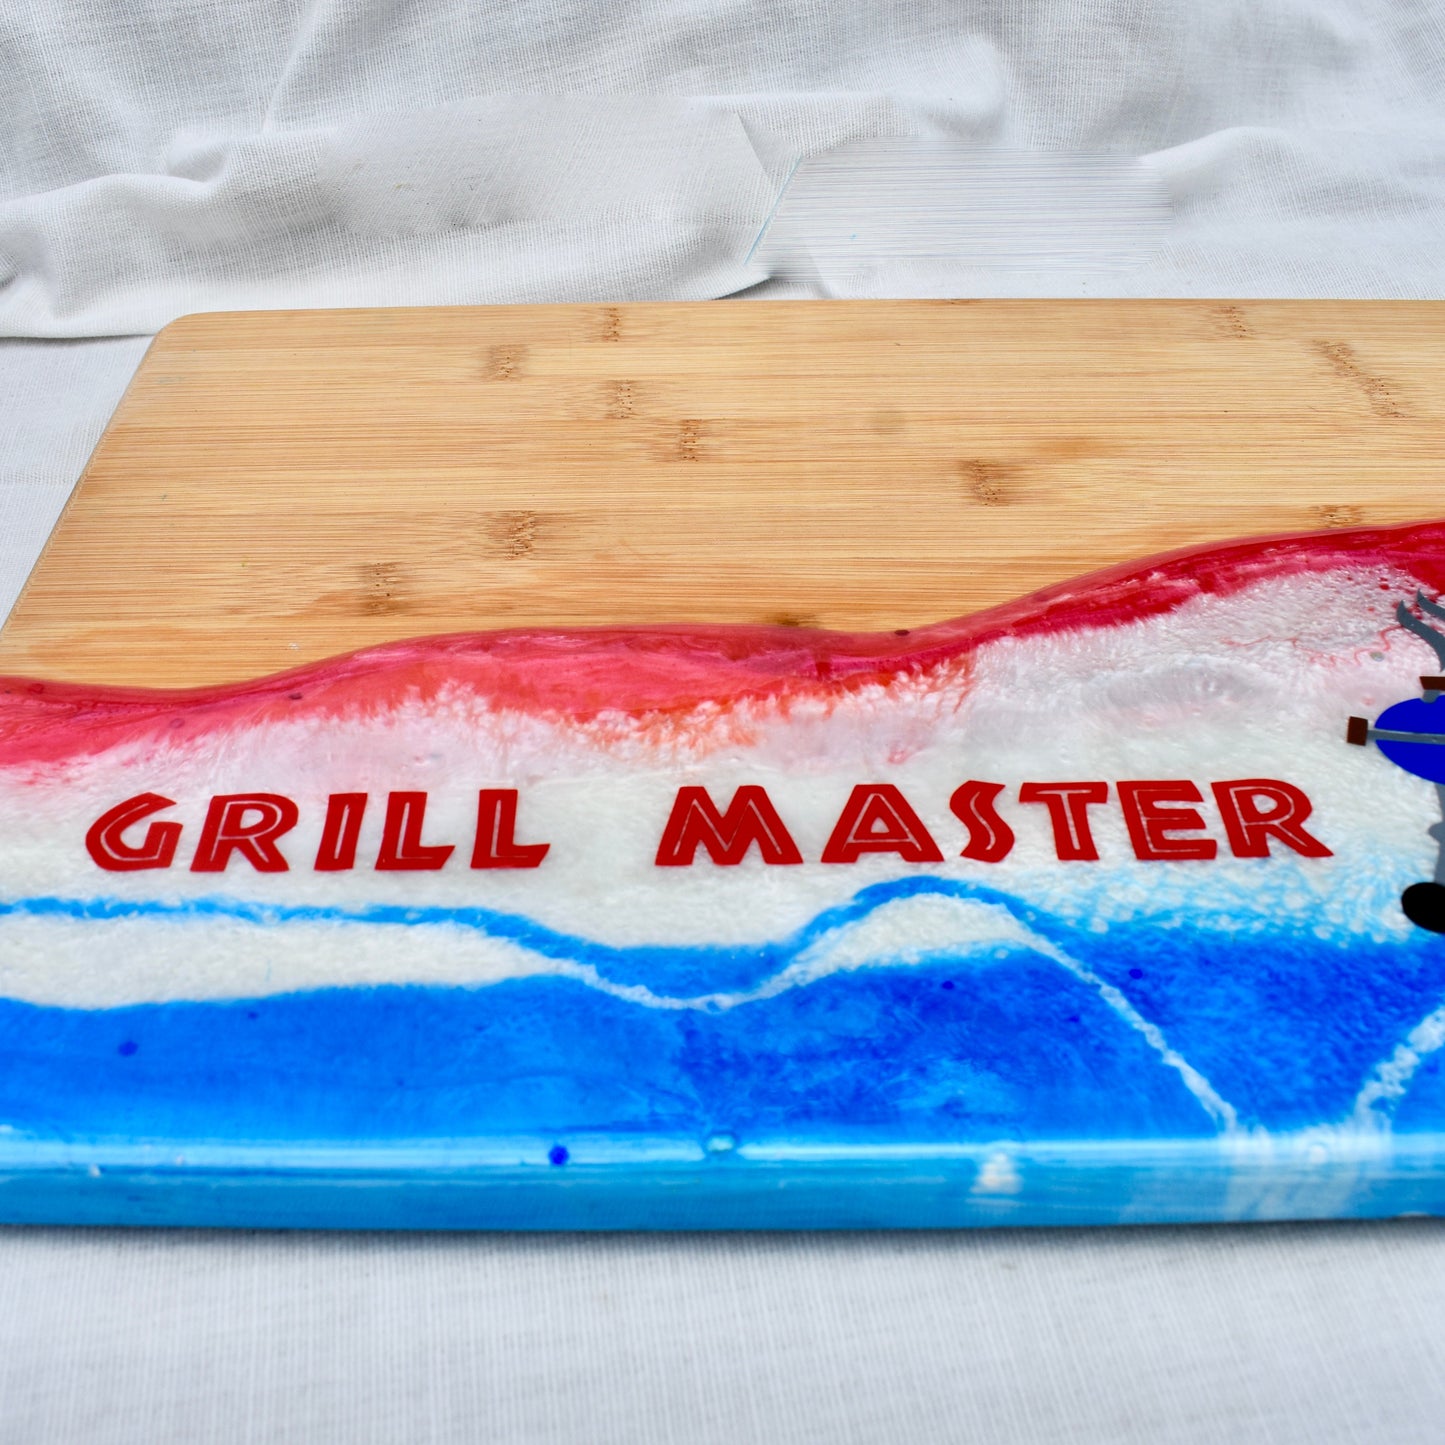 Grill Gift for Dad • Grill Master Cutting Board • BBQ Cutting/Serving Board